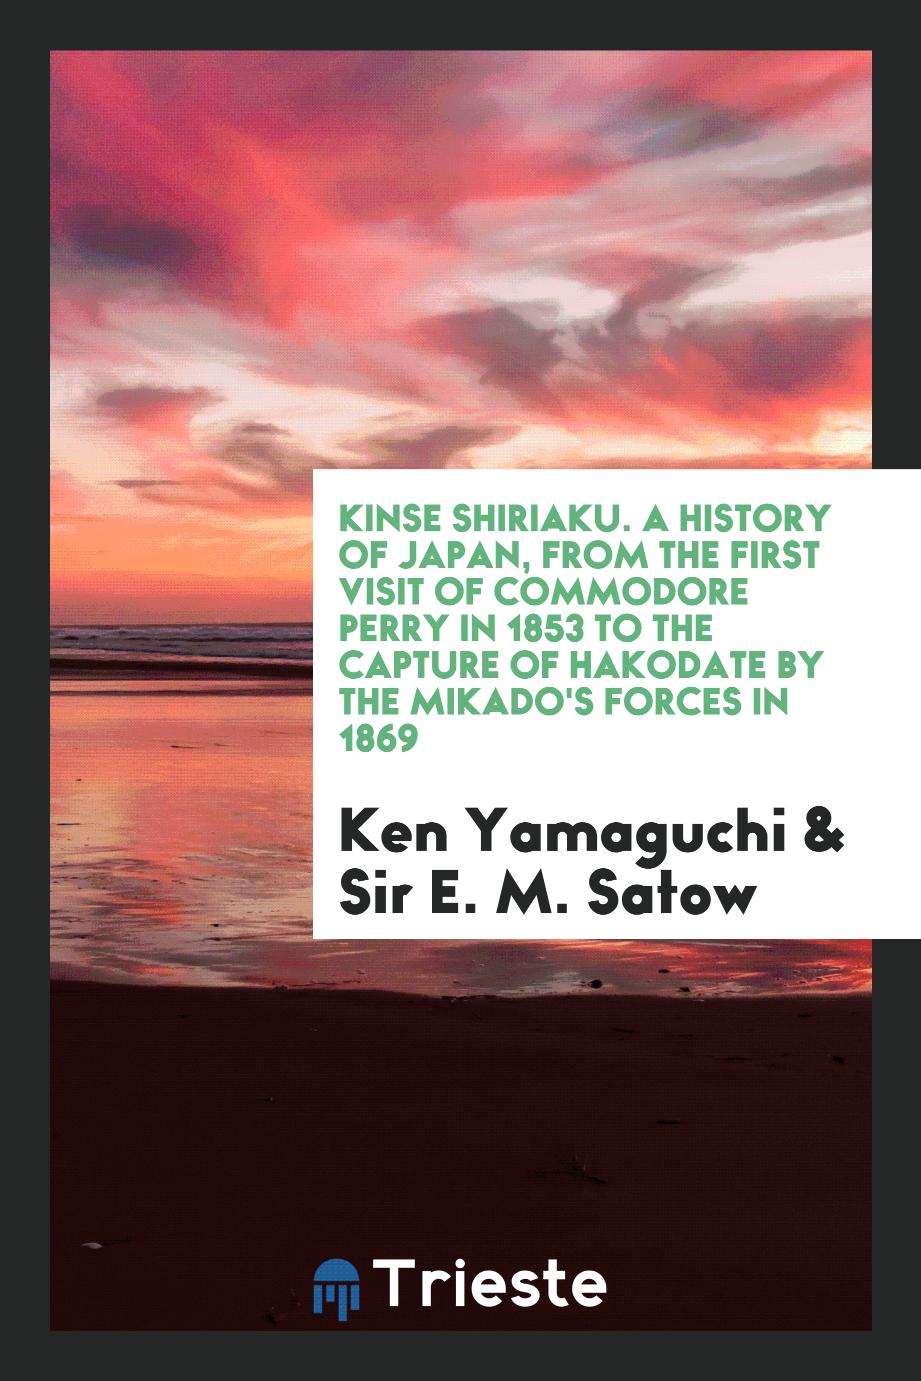 Kinse shiriaku. A history of Japan, from the first visit of Commodore Perry in 1853 to the capture of Hakodate by the Mikado's forces in 1869